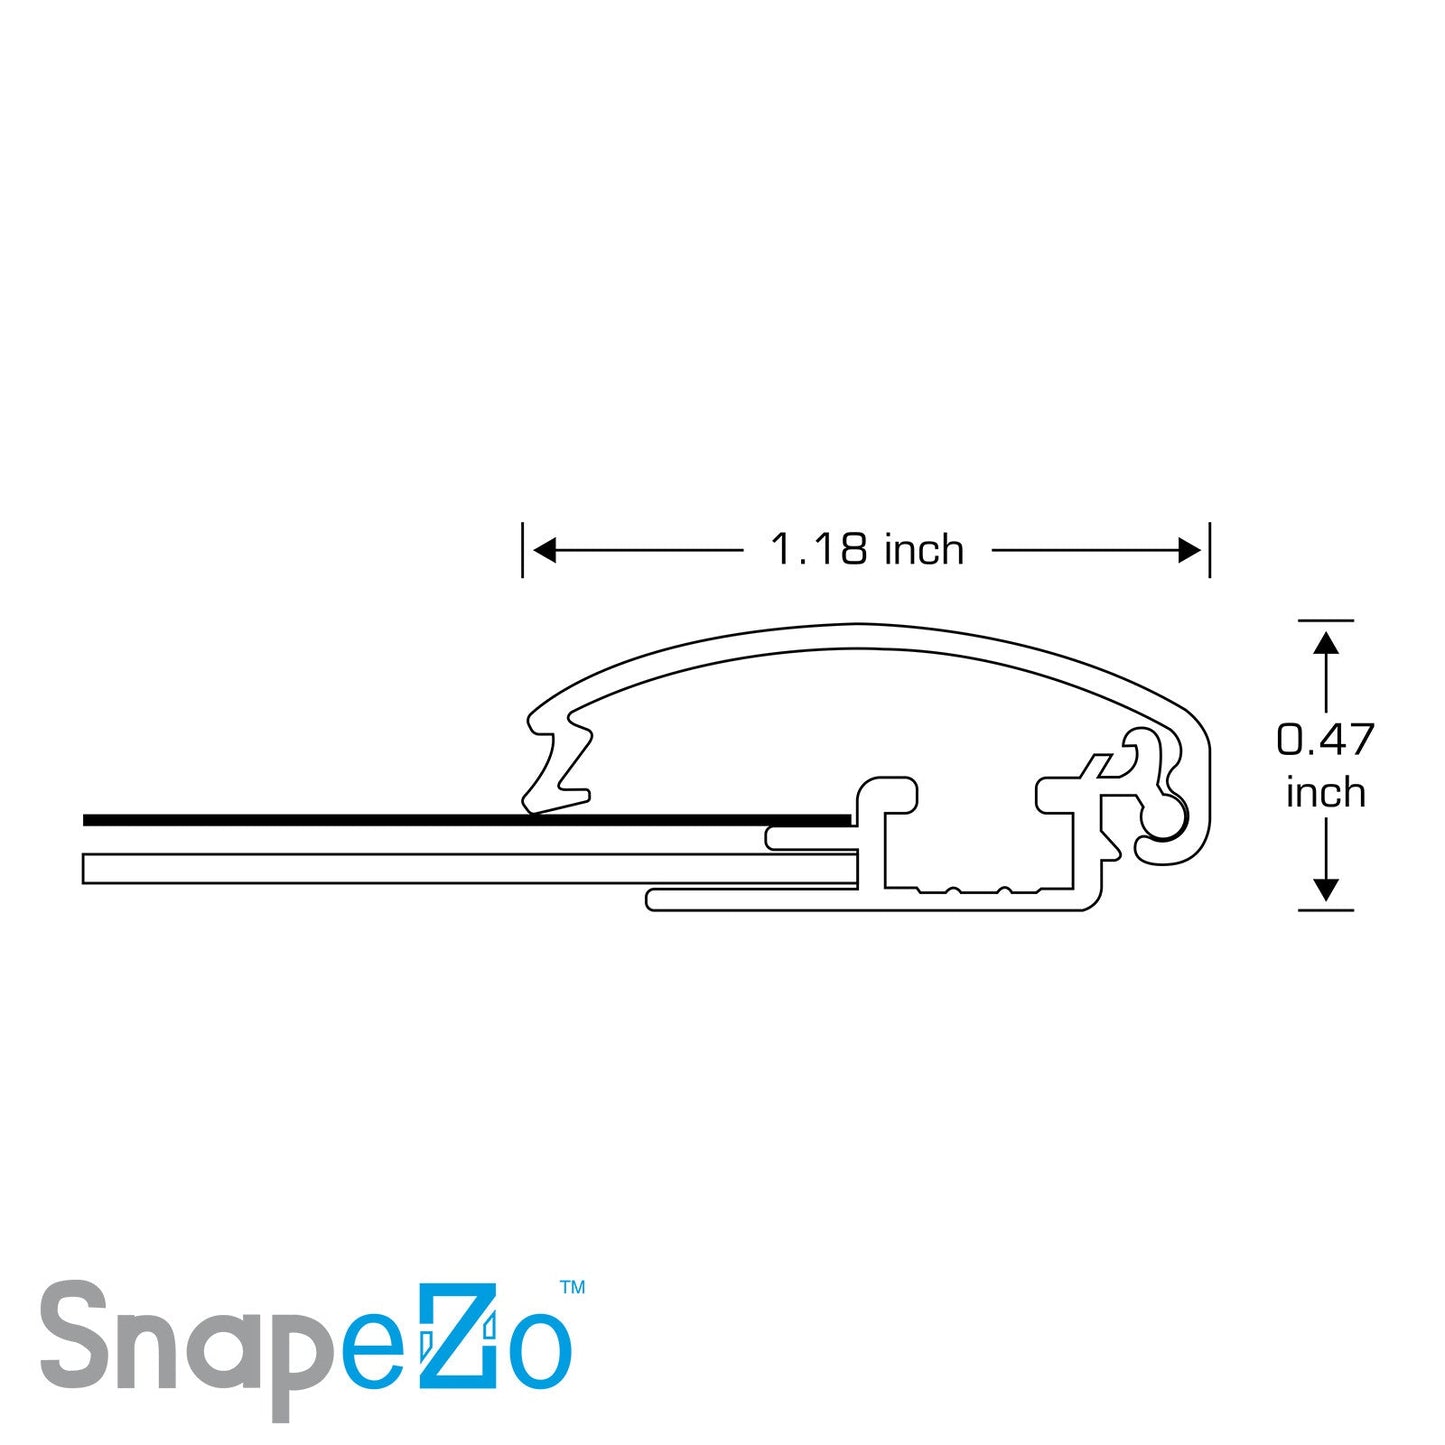 Load image into Gallery viewer, 13x20 White SnapeZo® Snap Frame - 1.2&amp;quot; Profile
